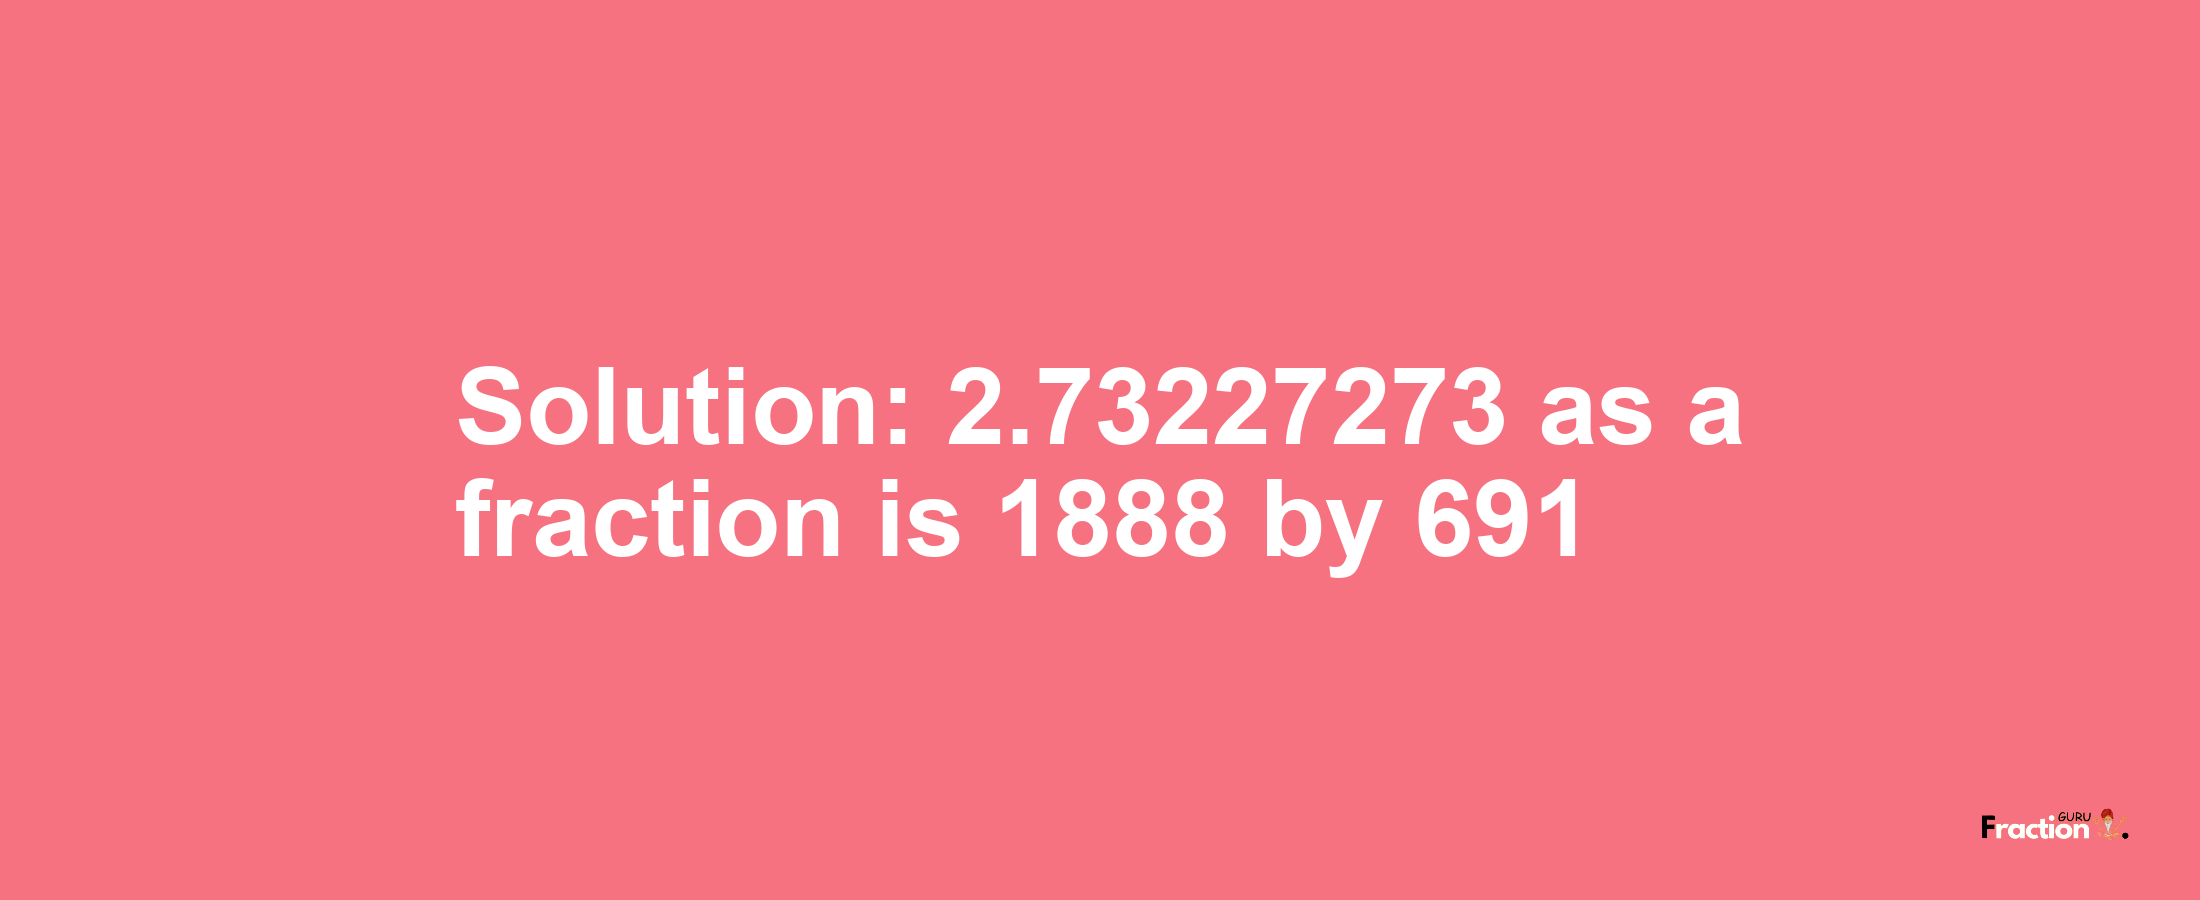 Solution:2.73227273 as a fraction is 1888/691